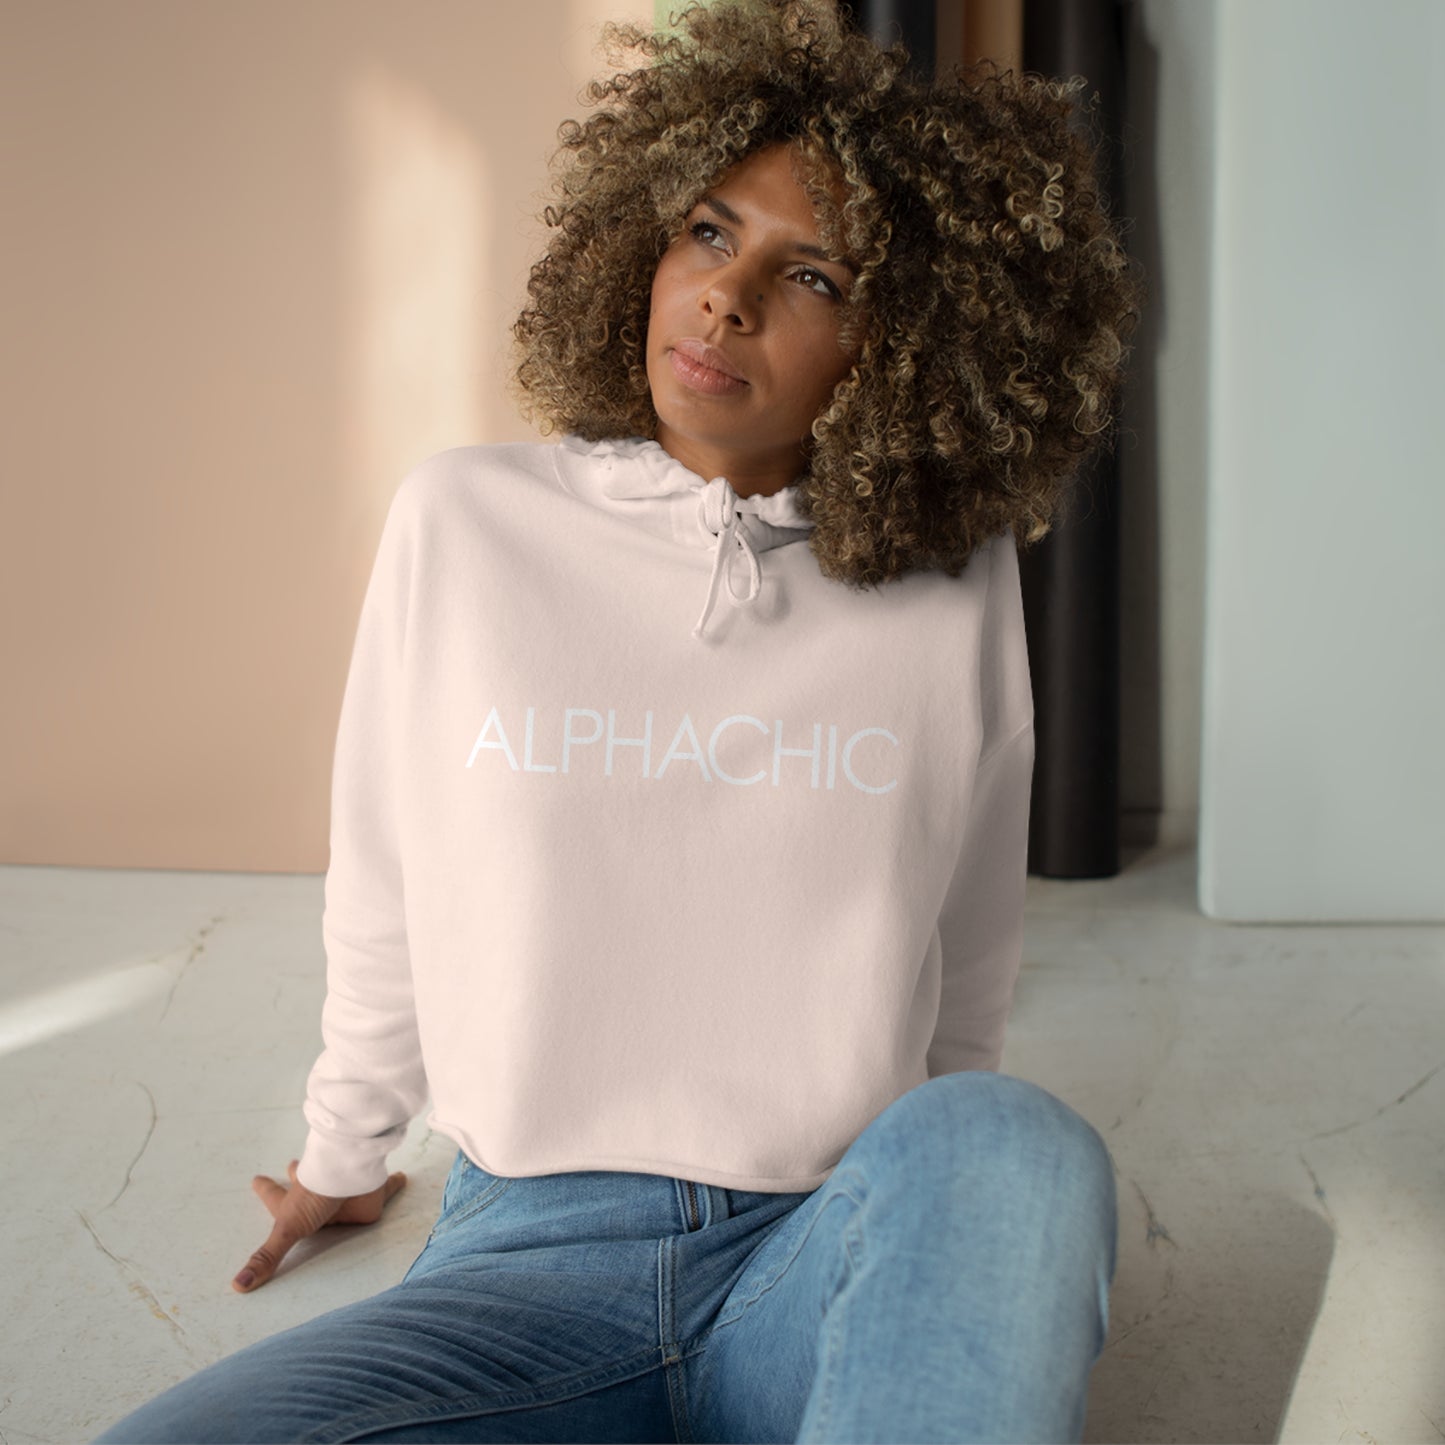 AlphaChic Cropped Hoodie